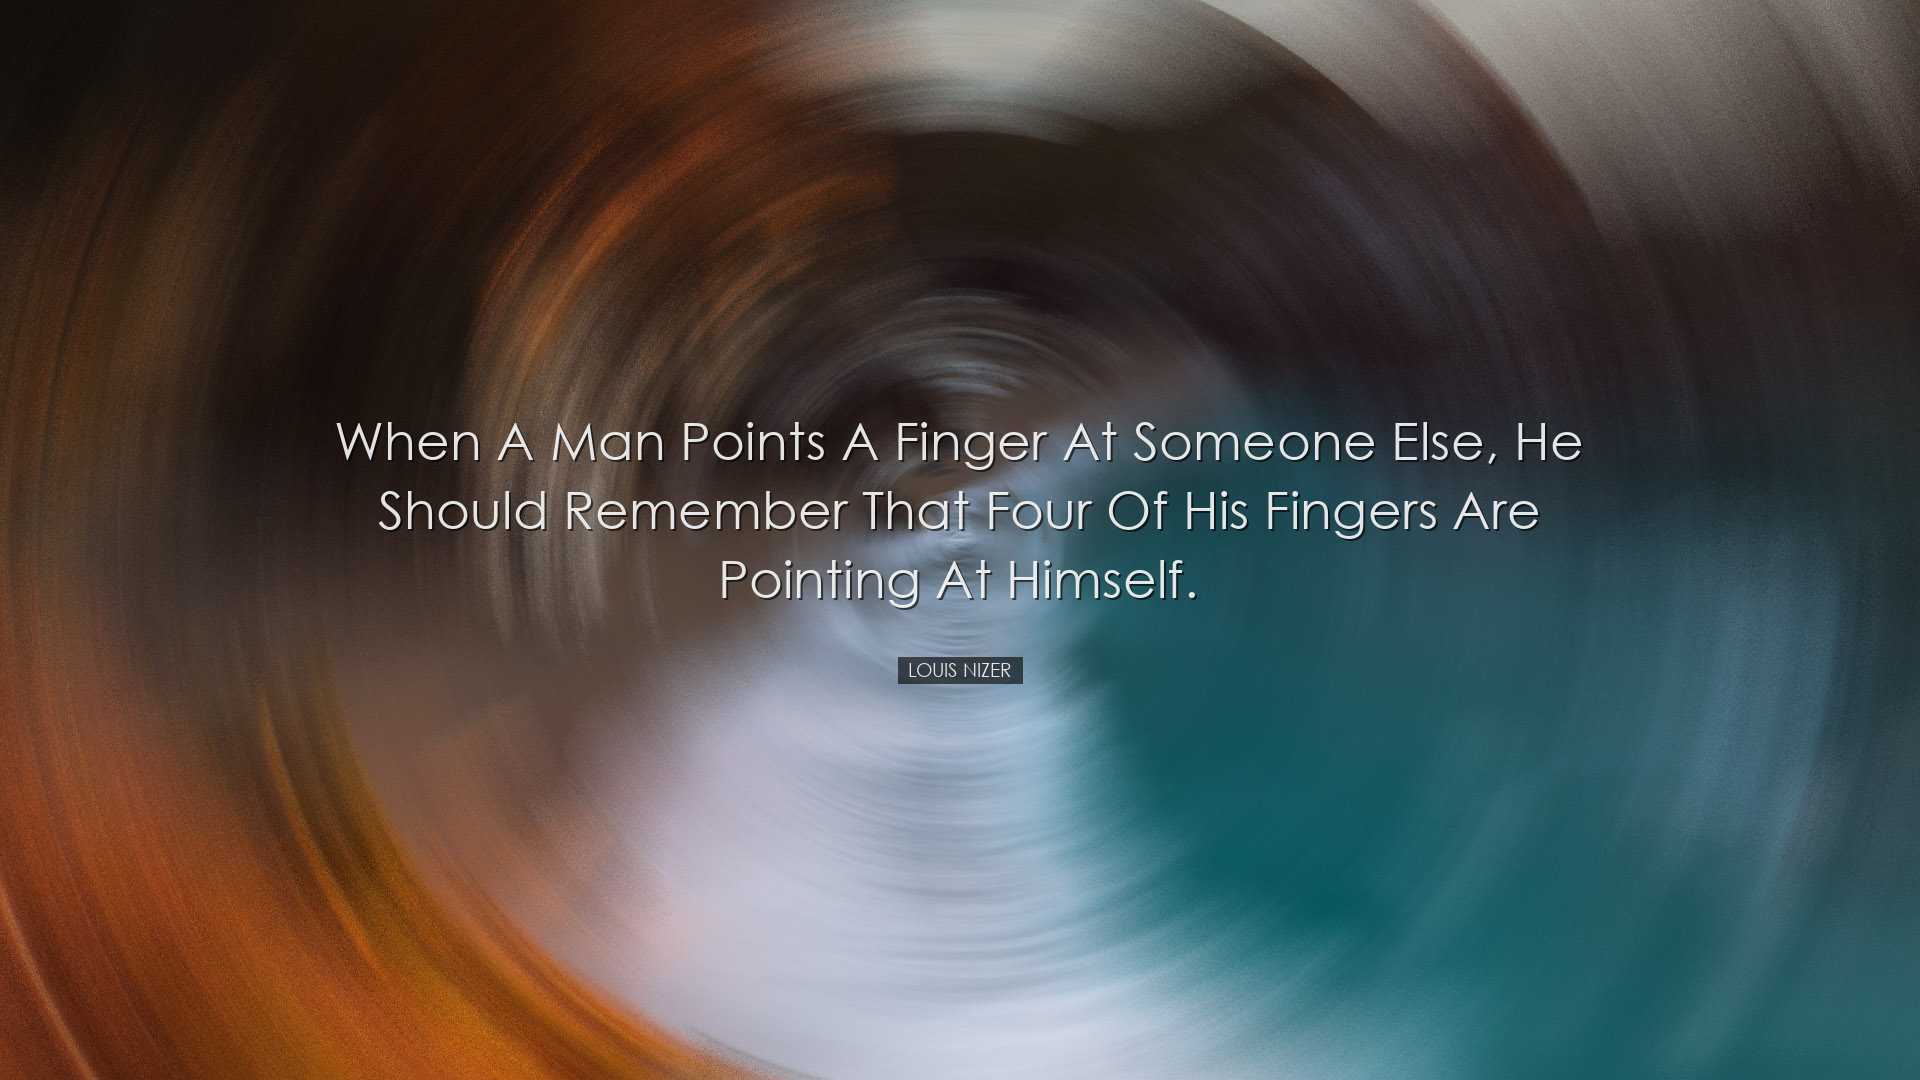 When a man points a finger at someone else, he should remember tha